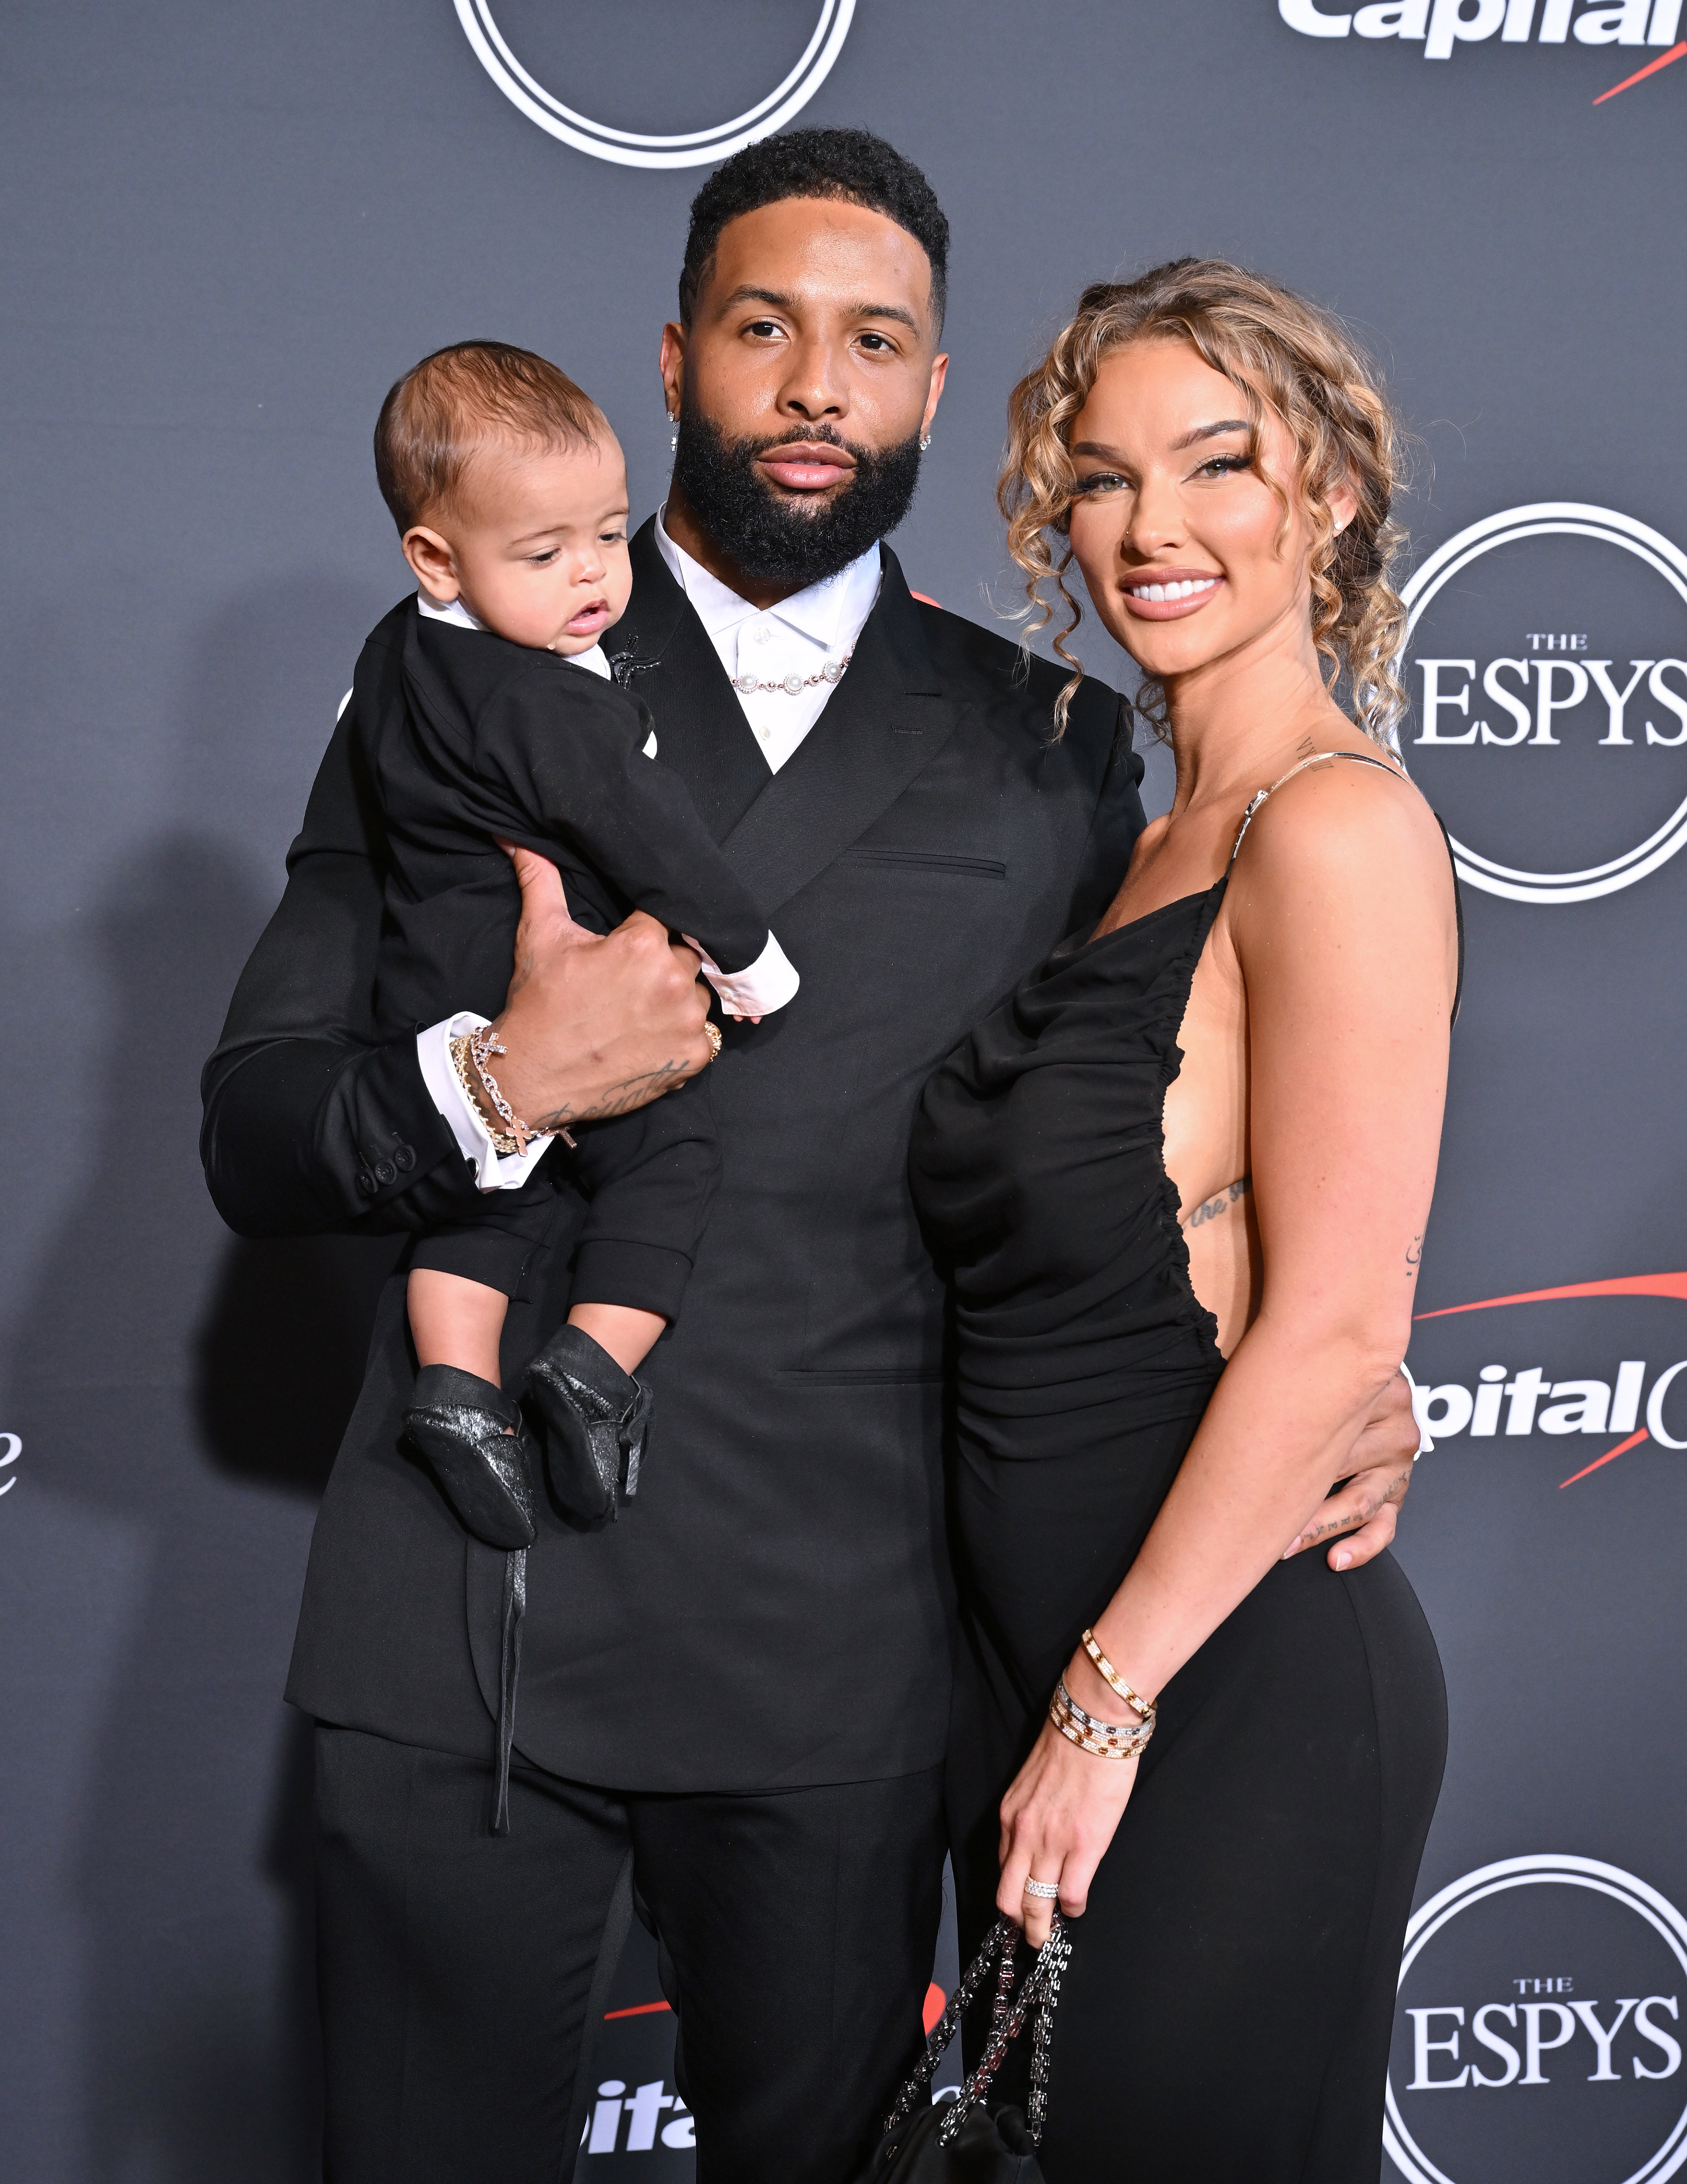 Odell, Lolo, and baby Zydn pose for photos on the Espys red carpet